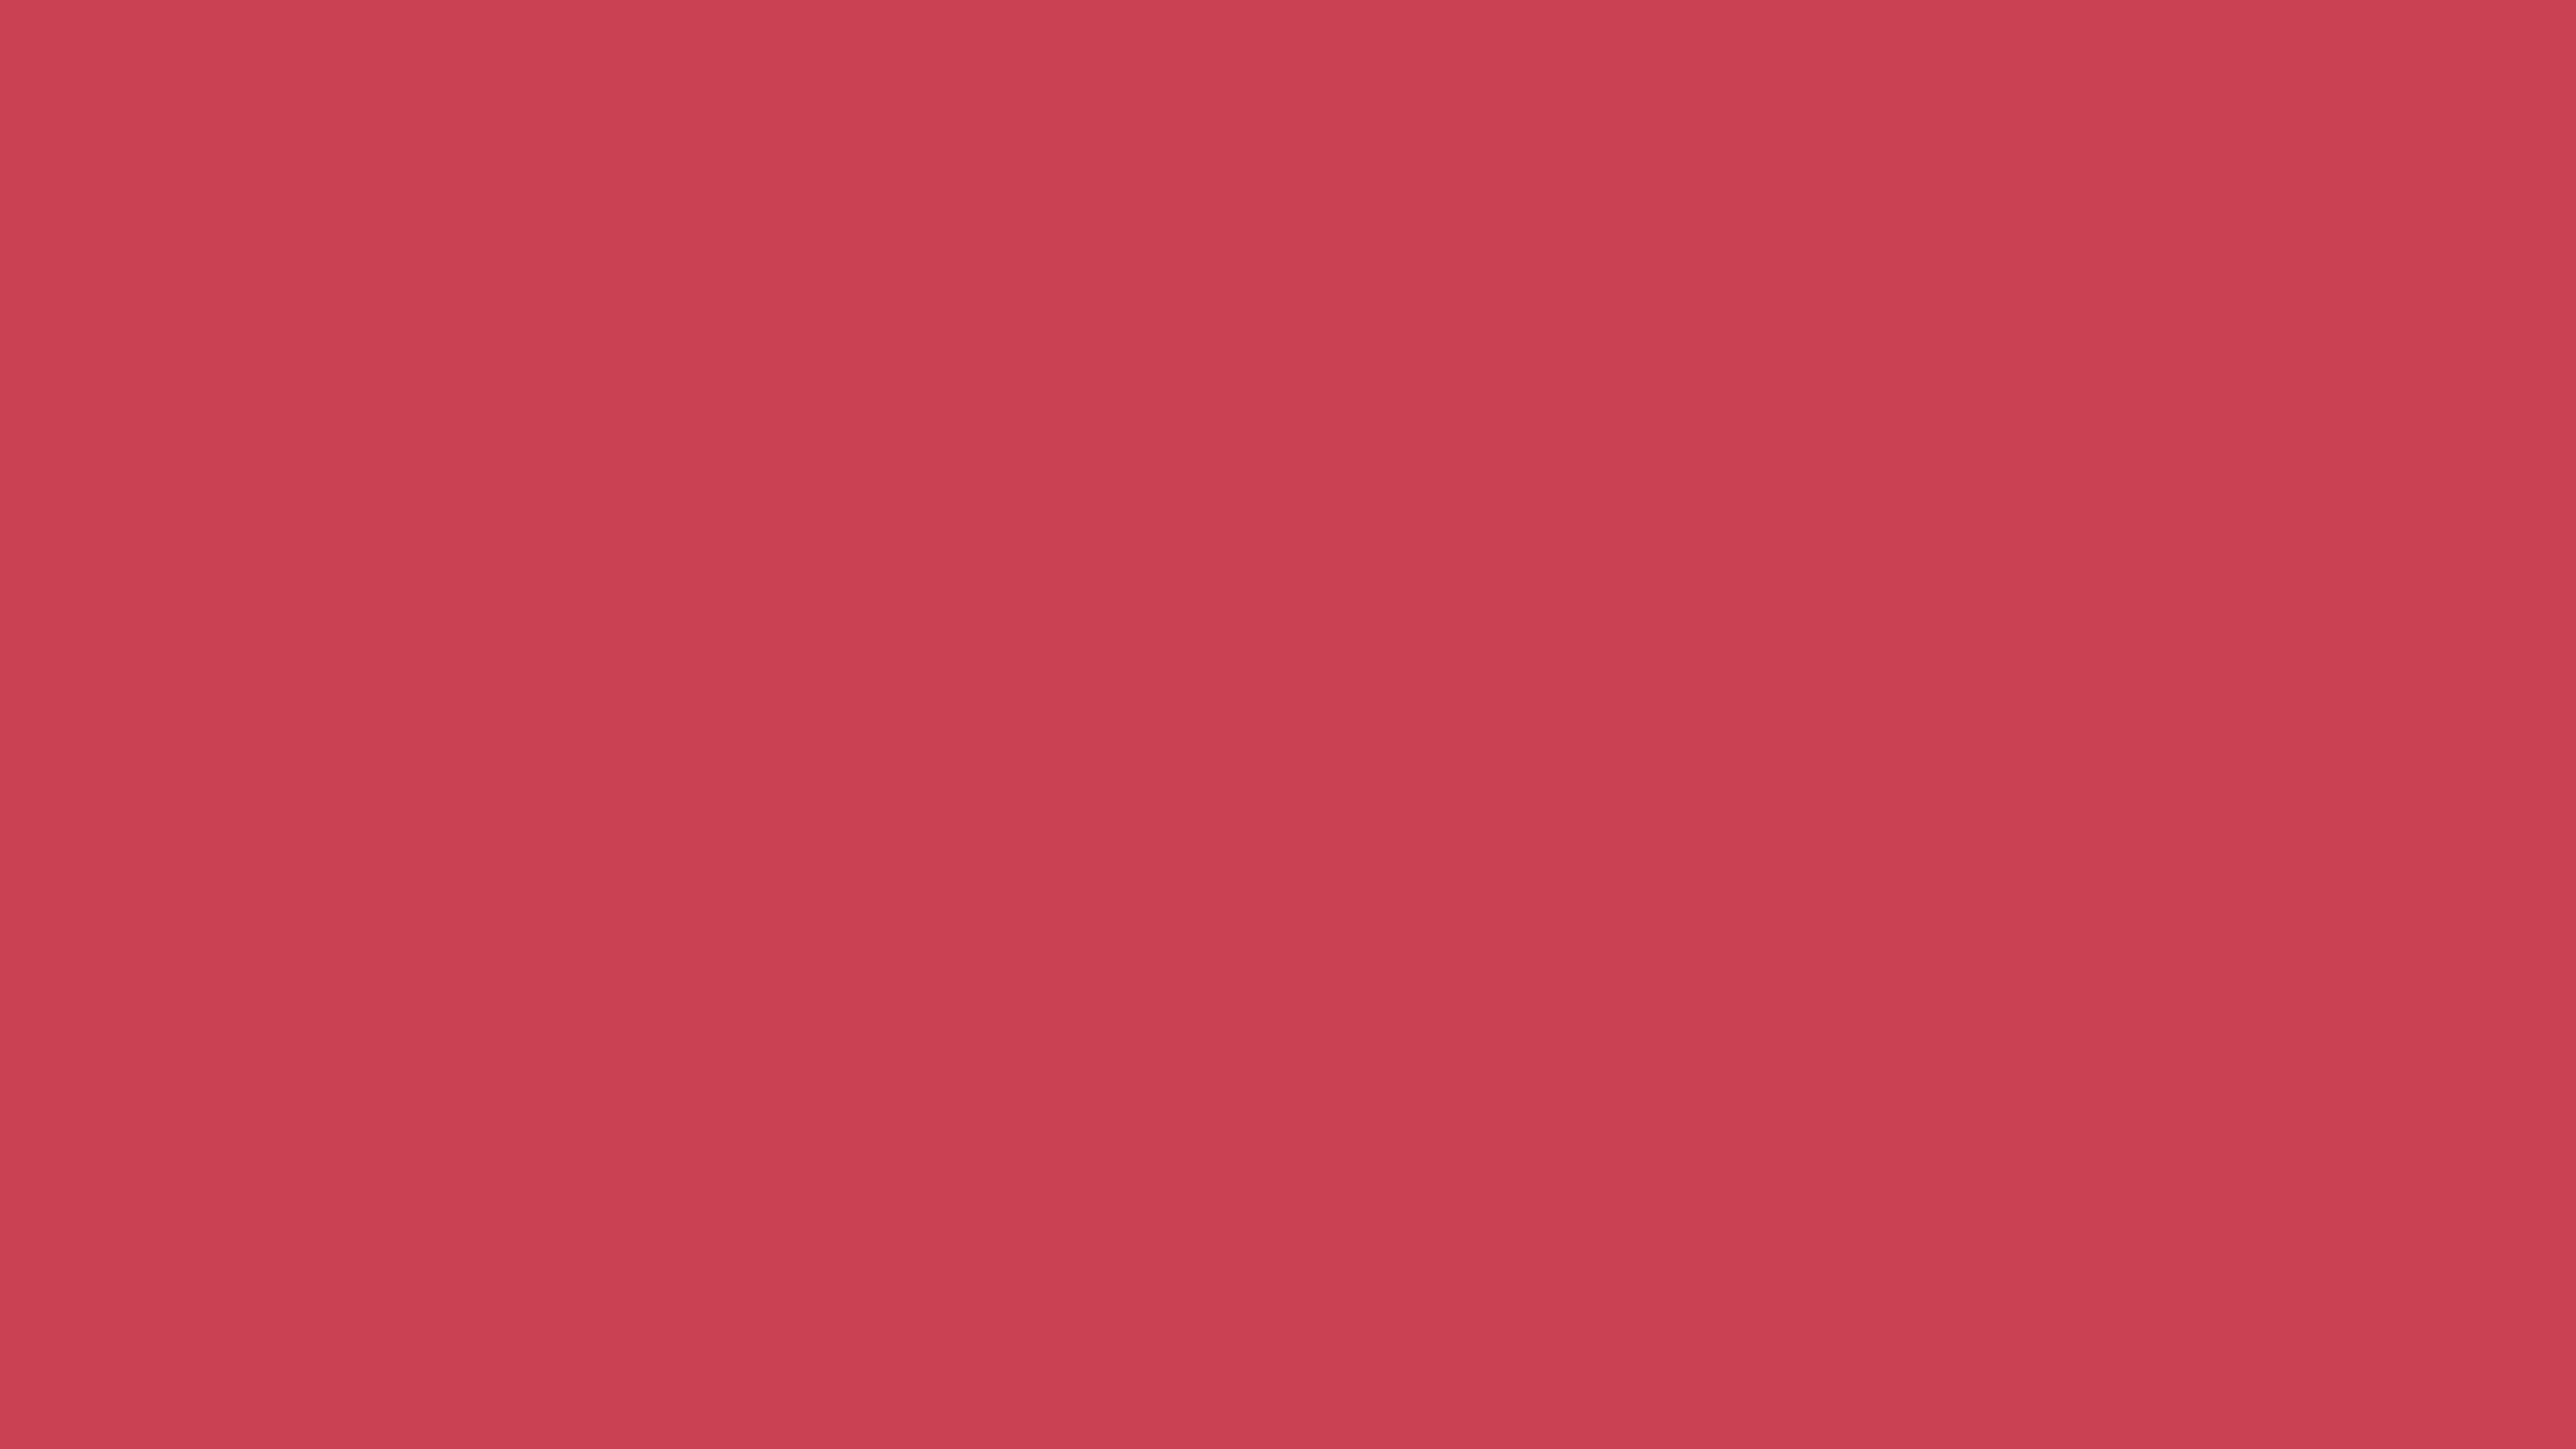 3840x2160 Brick Red Solid Color Background